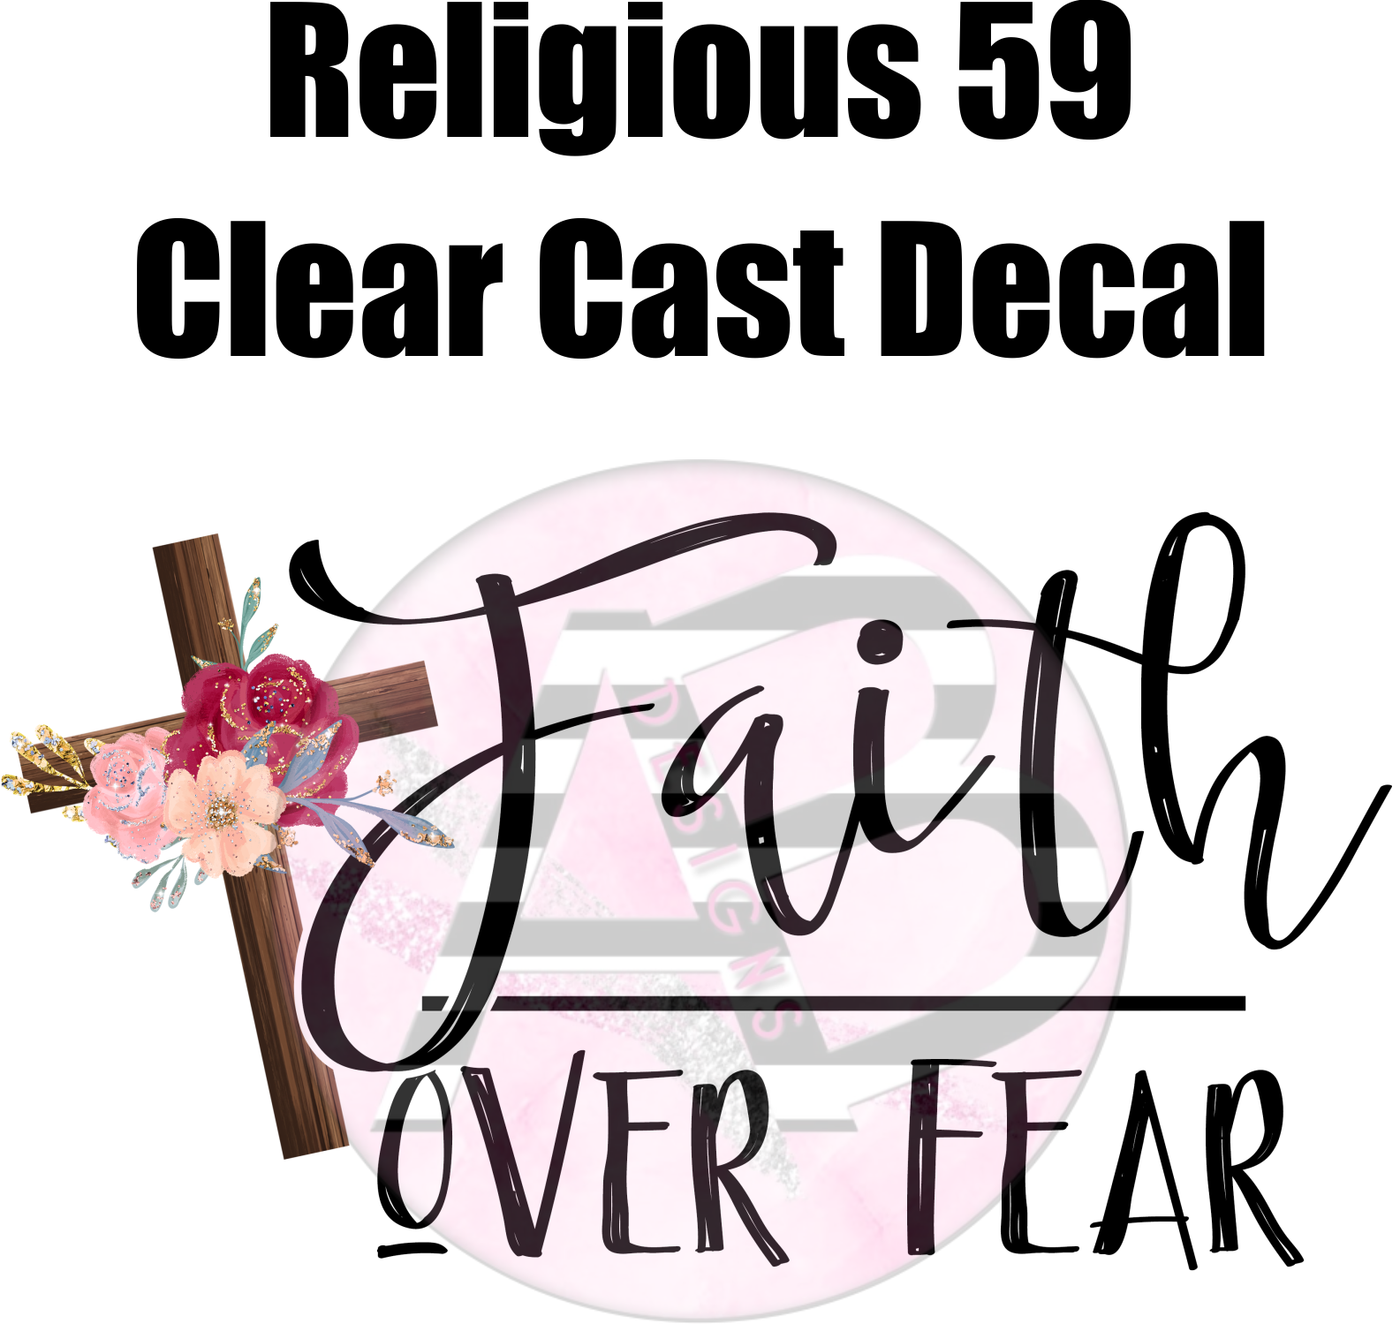 Religious 59 - Clear Cast Decal